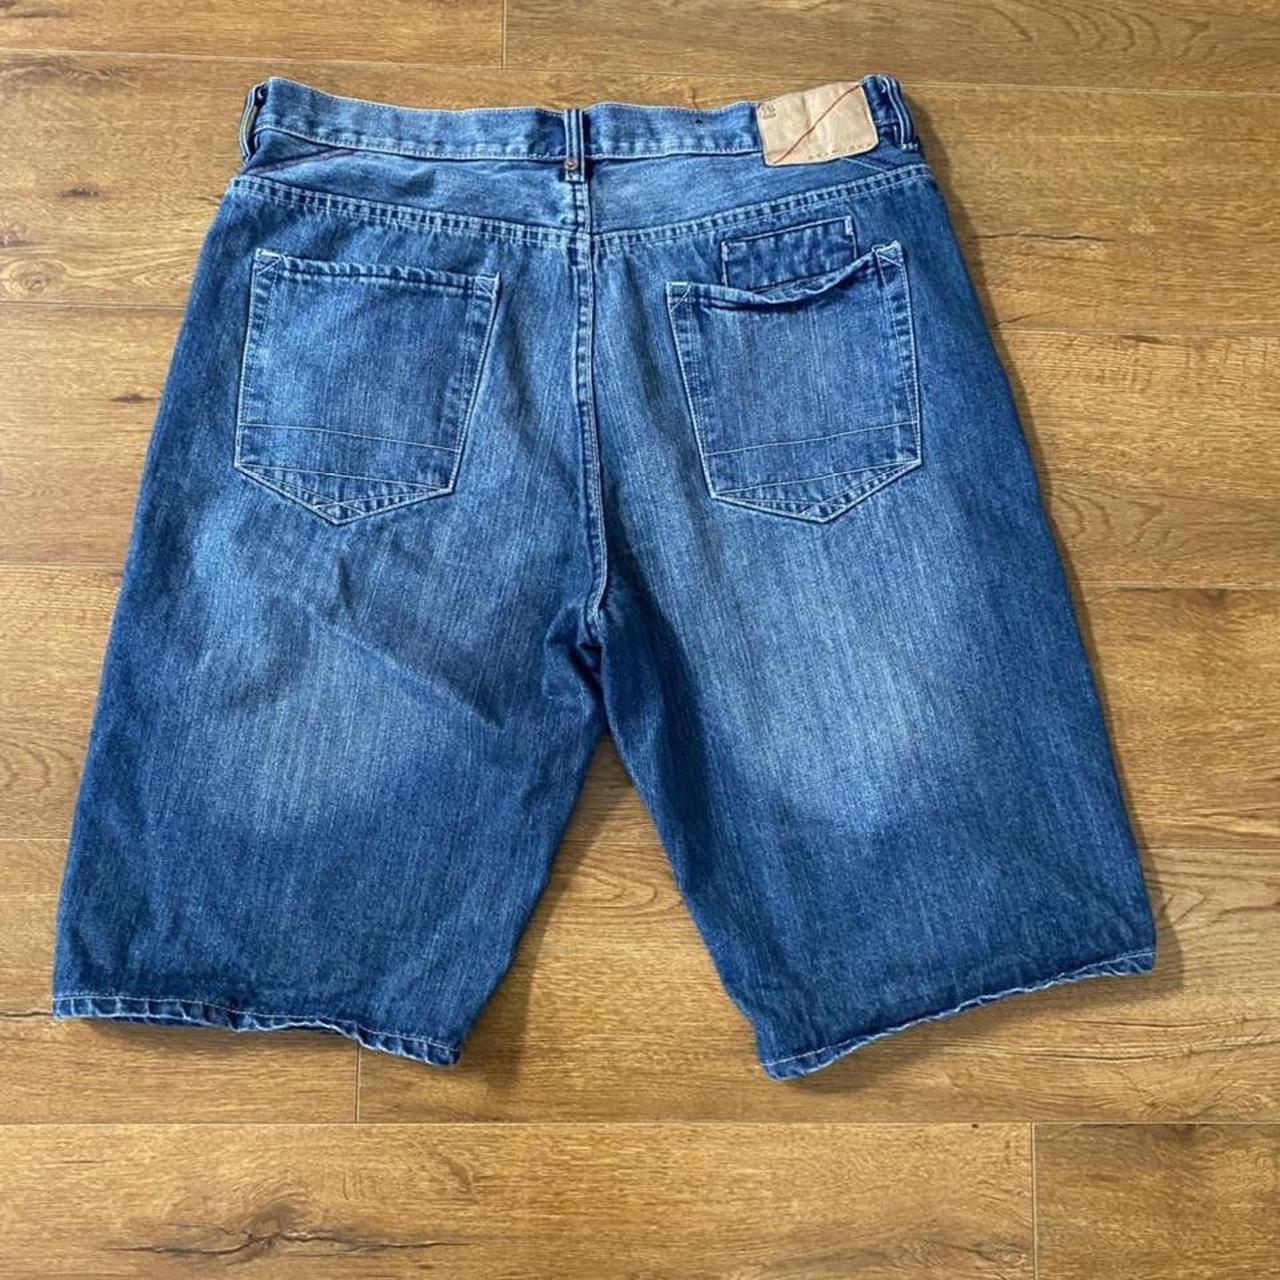 Men's Blue and Navy Shorts (3)